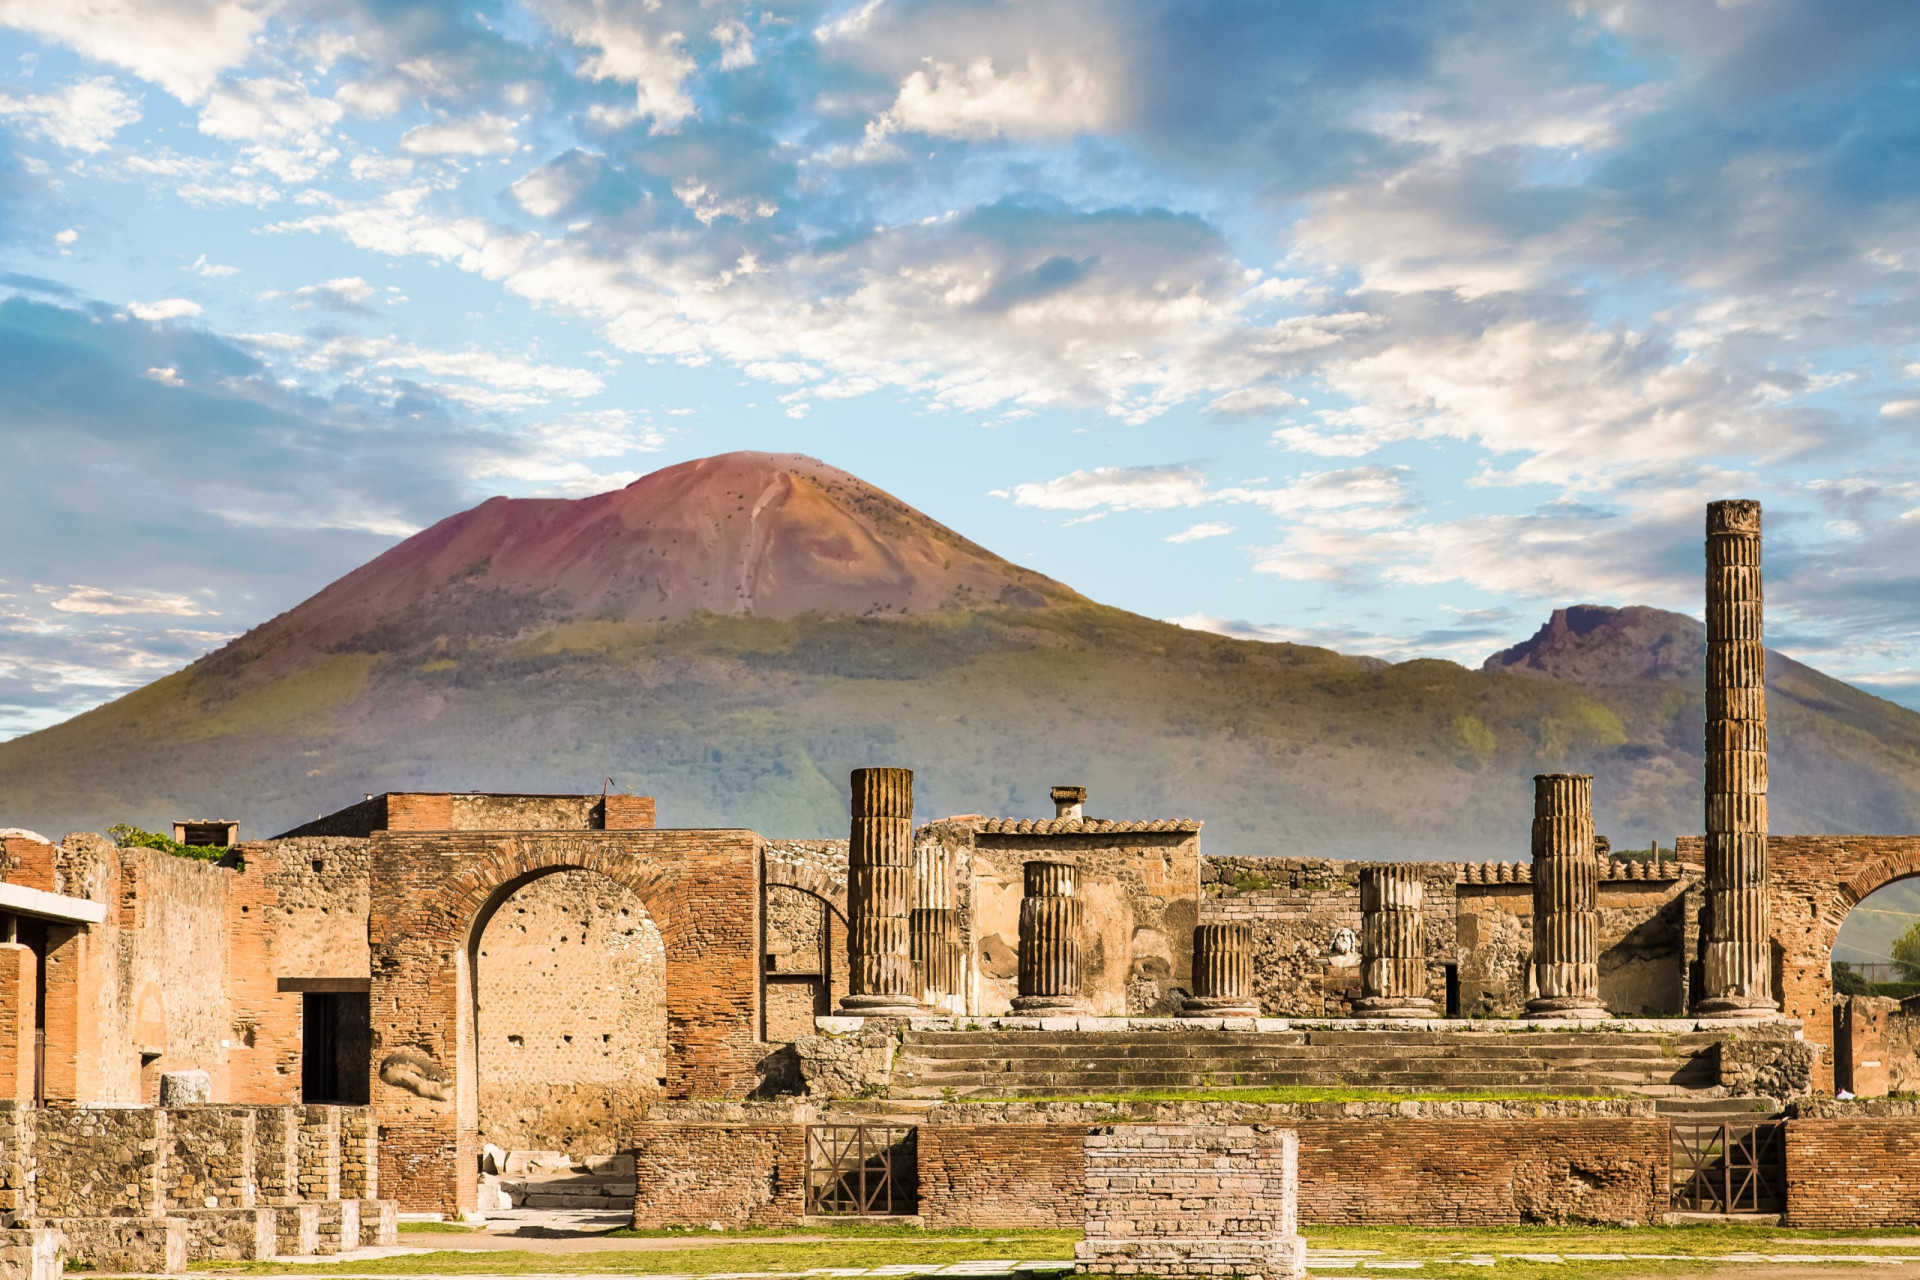 <p>The ruined city of Pompeii that famously fell victim to the eruption of Mount Vesuvius is also an idyllic travel destination, especially now that there is a new direct train from Rome.</p><p>You may also like:<a href="https://www.starsinsider.com/n/223010?utm_source=msn.com&utm_medium=display&utm_campaign=referral_description&utm_content=701834en-us"> Celebrities in the same outfits: Who wore it better? </a></p>